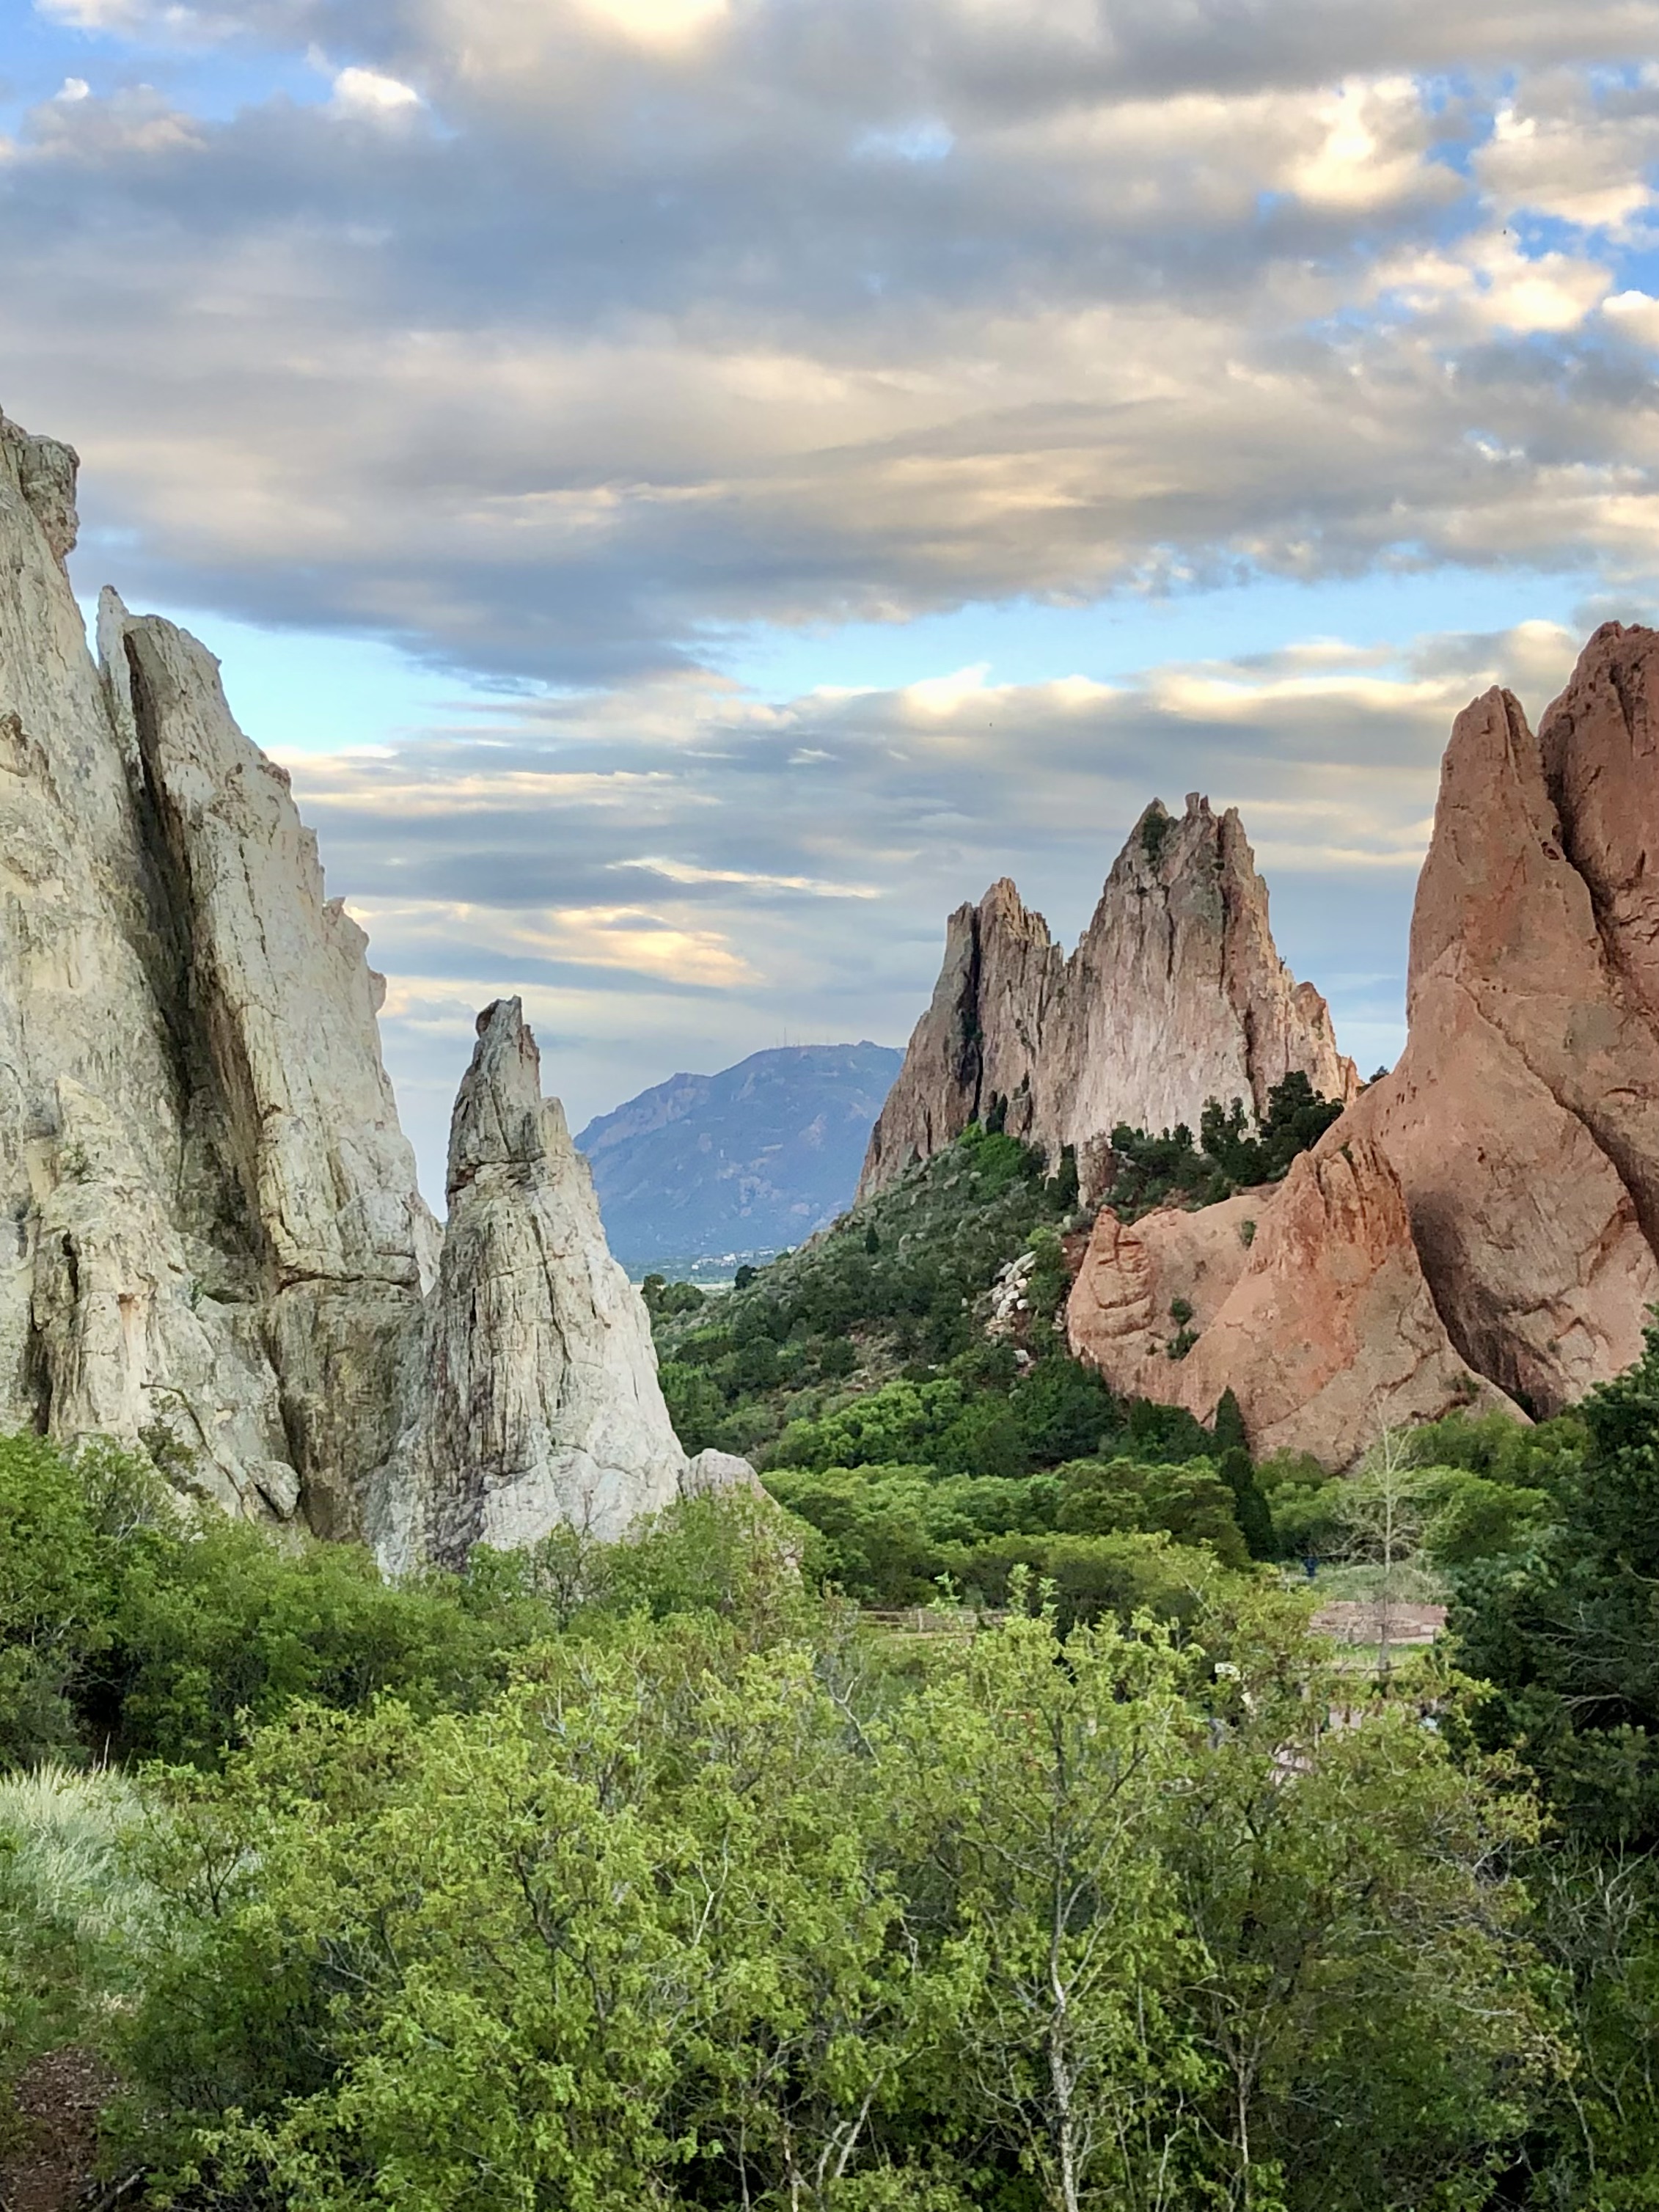 Green trees form the front of this picture and red jagged rocks. Cloudy sky with a sunset are the backdrop.